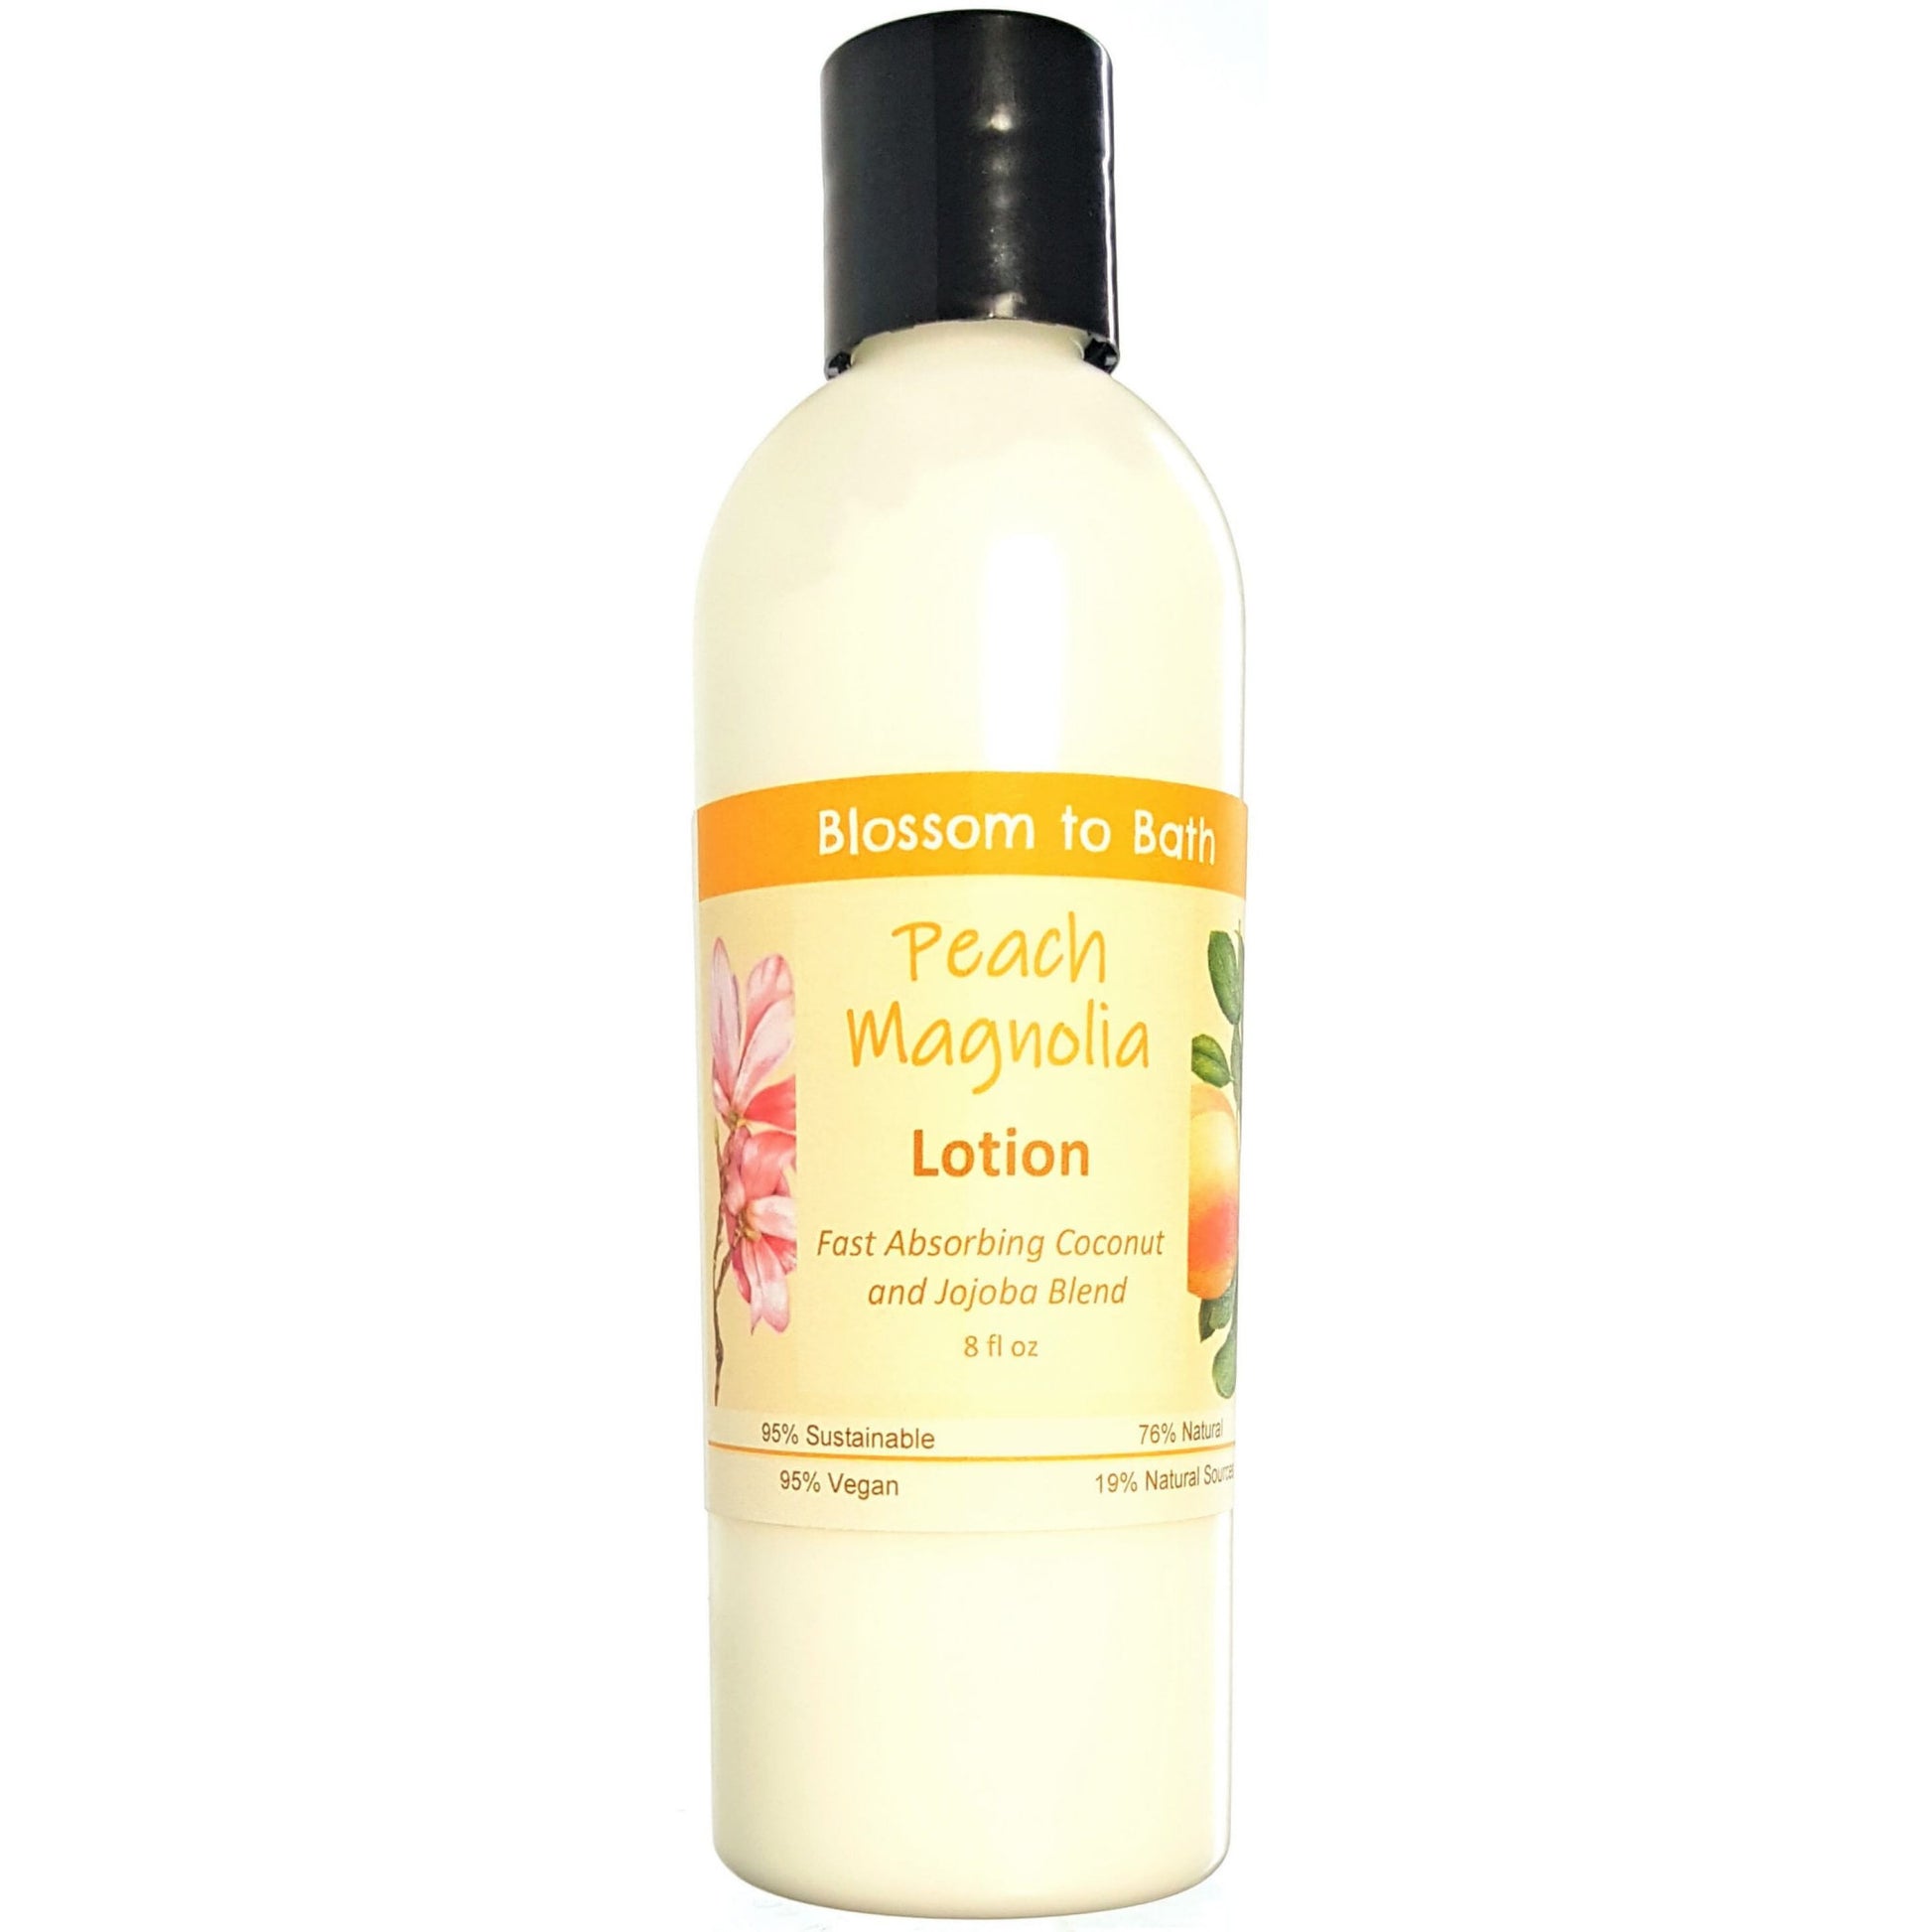 Buy Blossom to Bath Peach Magnolia Lotion from Flowersong Soap Studio.  Daily moisture  that soaks in quickly made with organic oils and butters that soften and smooth the skin  An intoxicating blend of peach, magnolia, and raspberry.